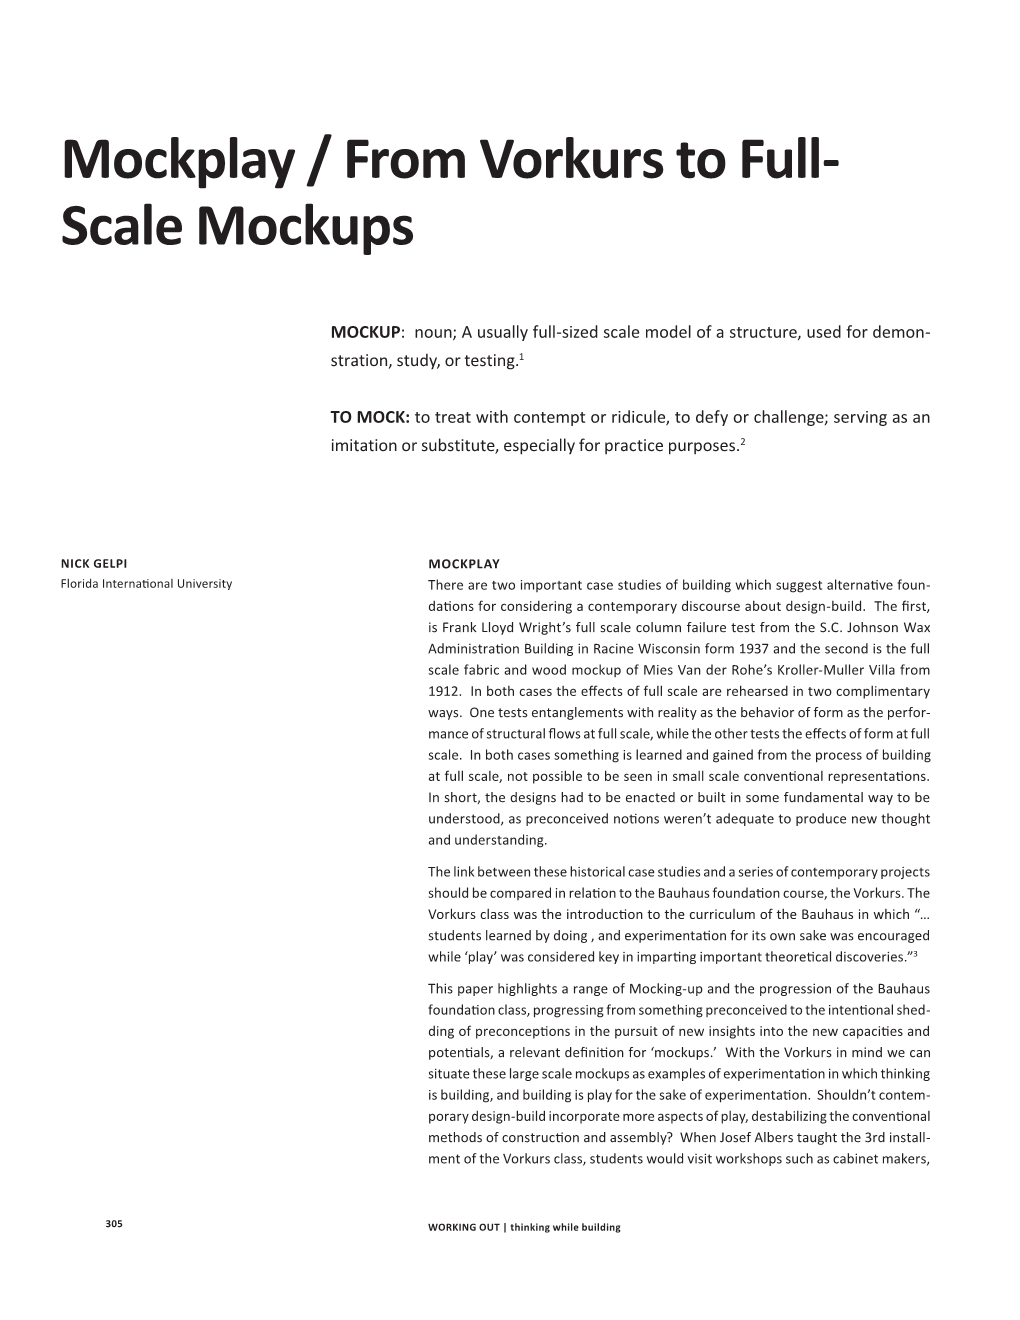 Mockplay / from Vorkurs to Full- Scale Mockups